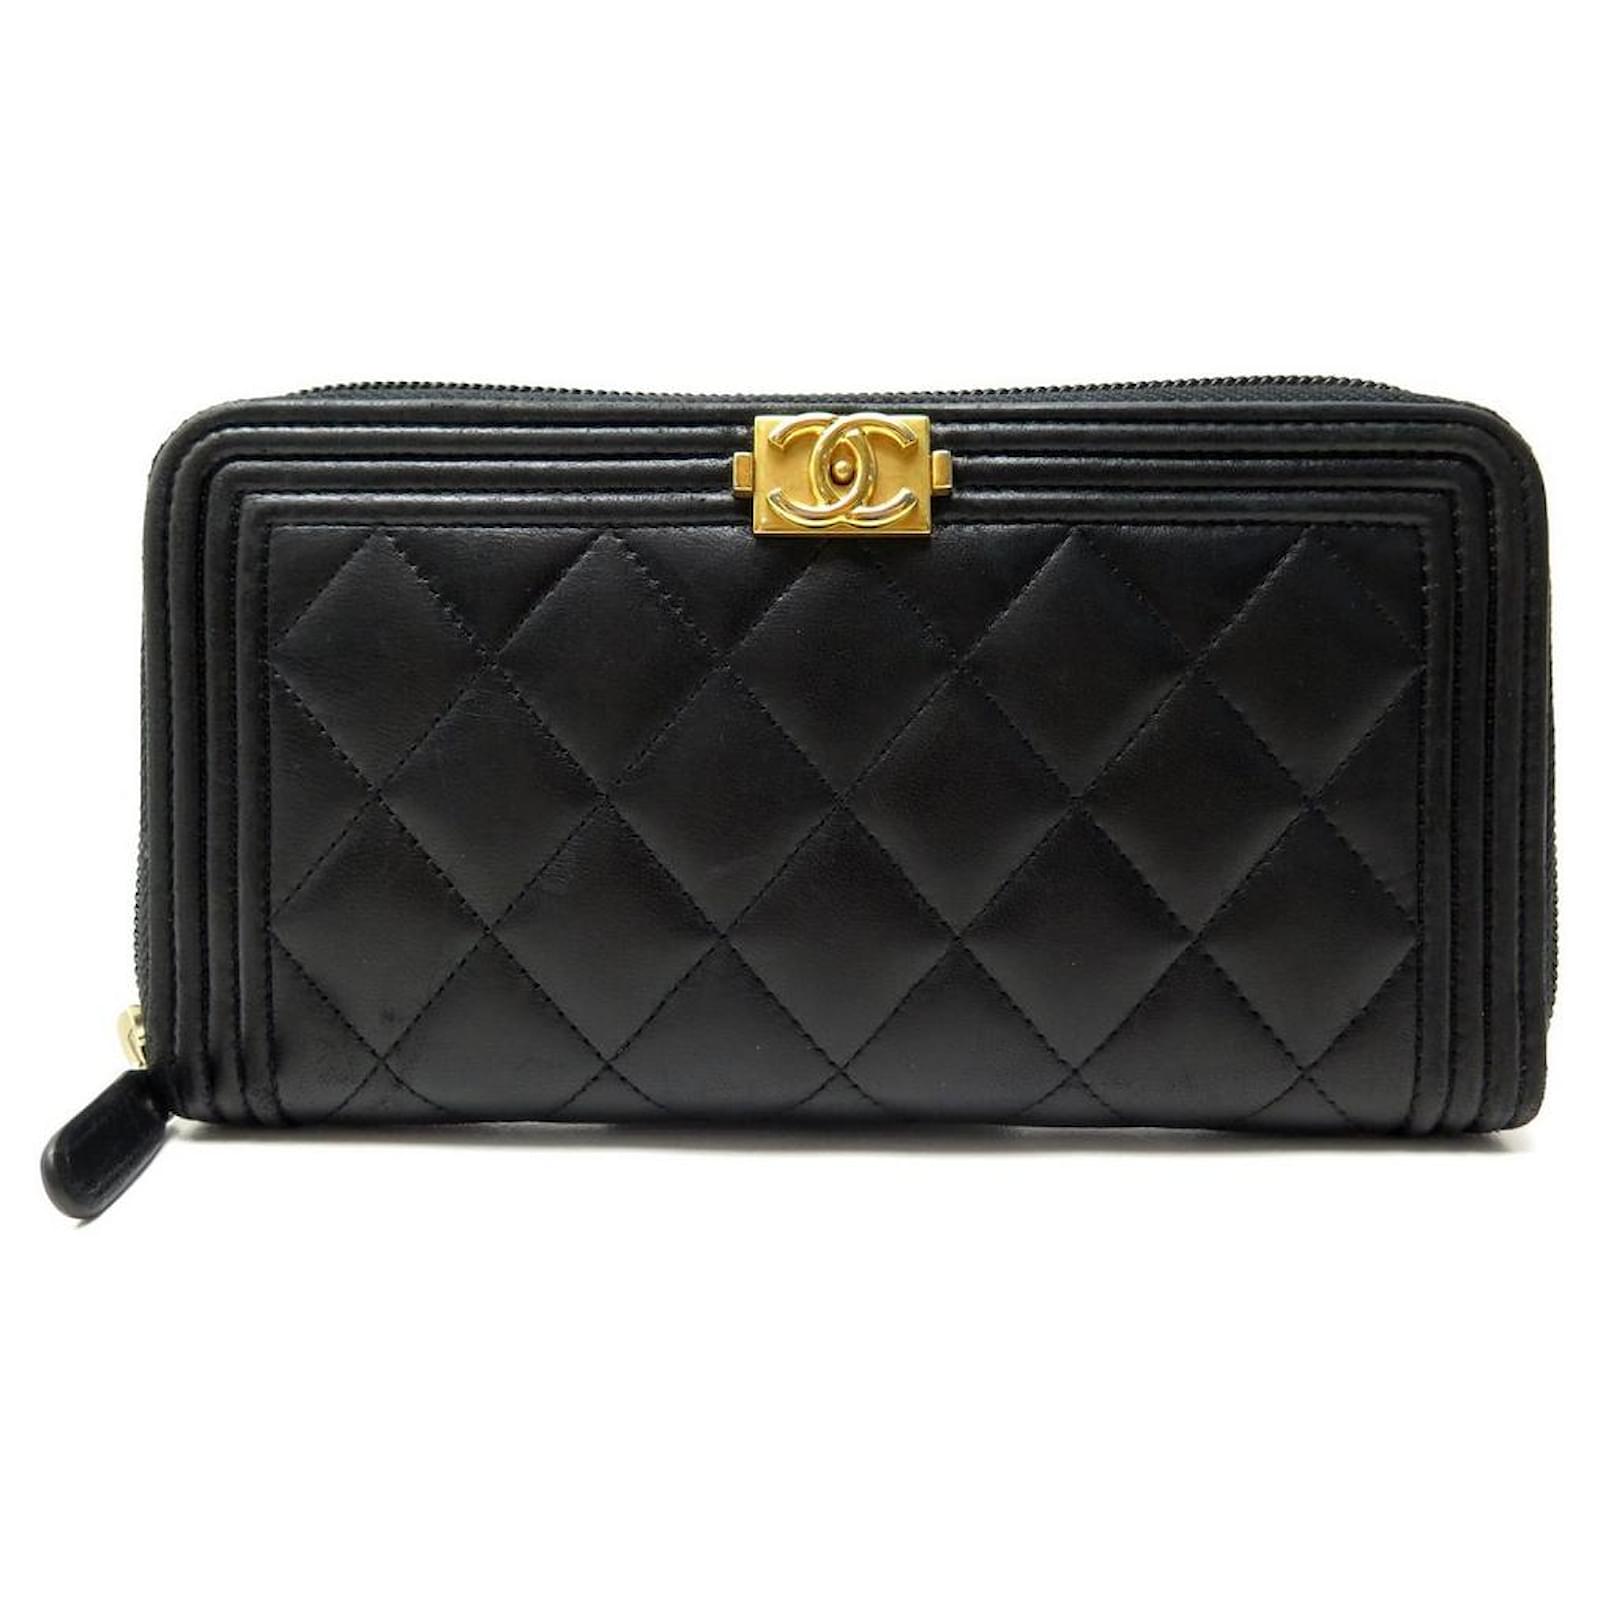 CHANEL BOY ZIPPED WALLET IN BLACK QUILTED LEATHER A80815 LEATHER WALLET